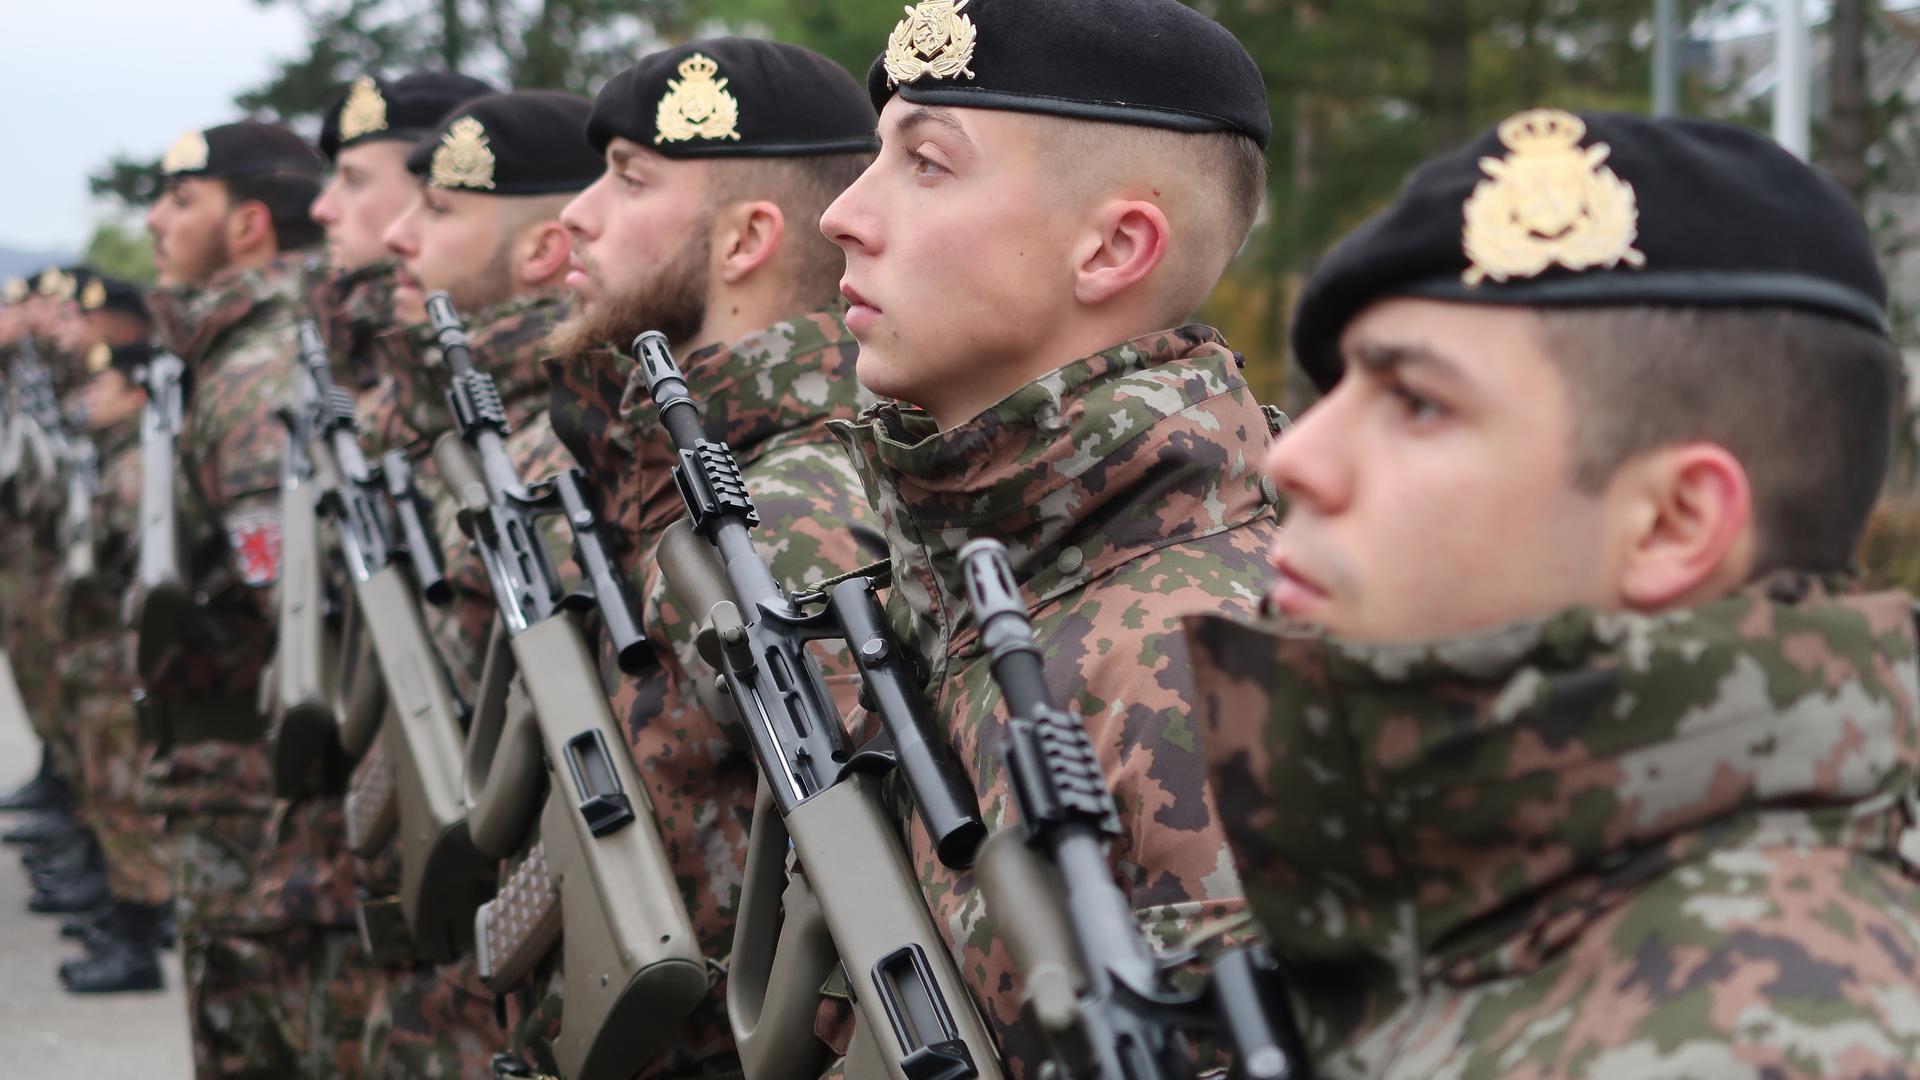 One staff member from Luxembourg's army will be deployed to the EU's military mission to support Ukraine